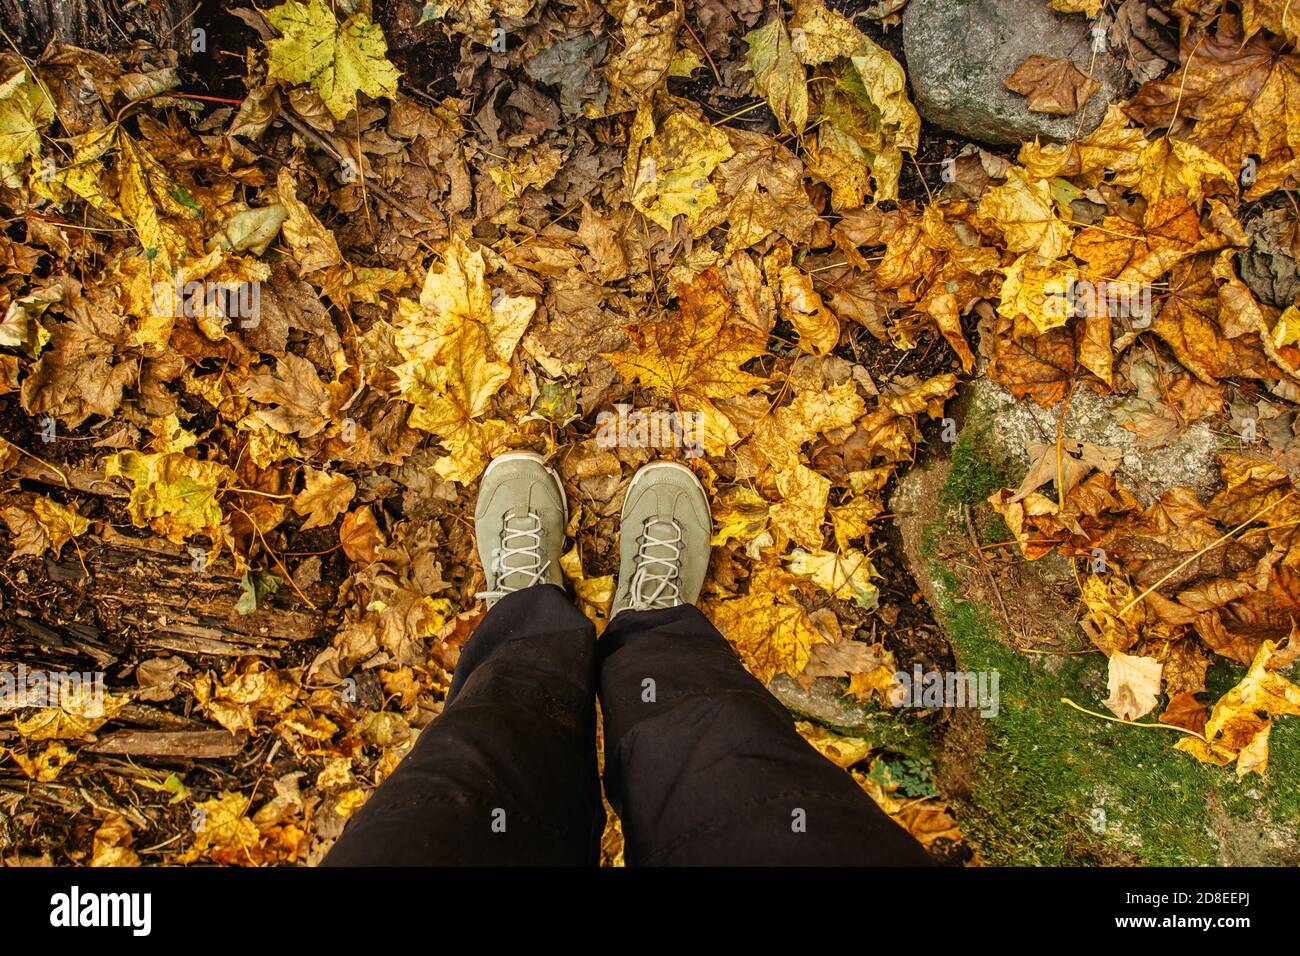 Romantic Outdoor with Autumn leaves on background. Lifestyle Fashion concept. Girl hiking boots. Fall autumn colors. High angle view of human leg Stock Photo